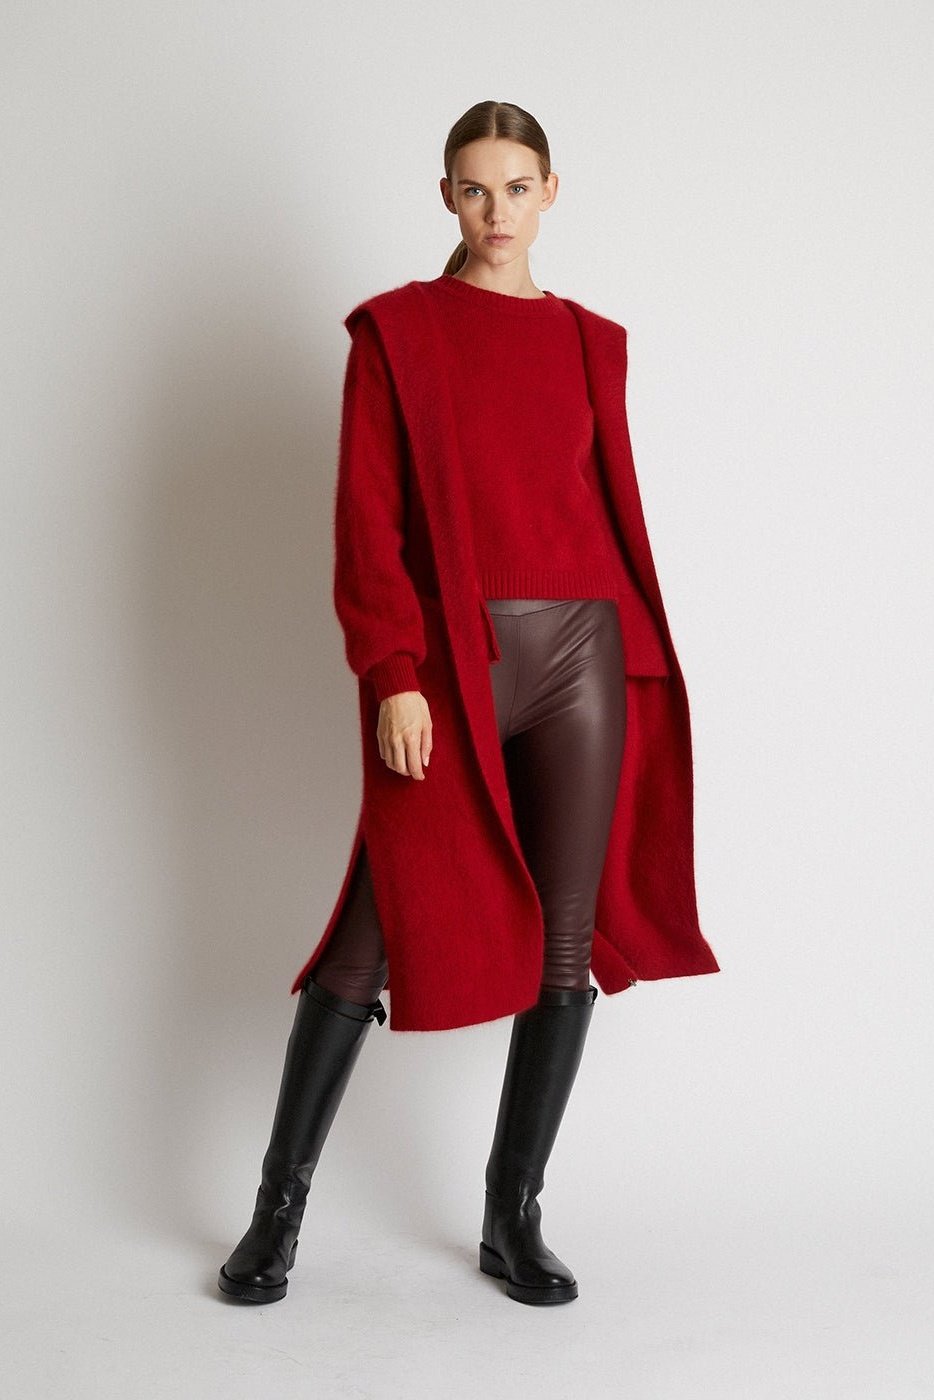 + Beryll Pure Cashmere Coat with Hood | Cherry Red - +Beryll Cashmere Coat with Hood | Cherry Red - +Beryll Worn By Good People